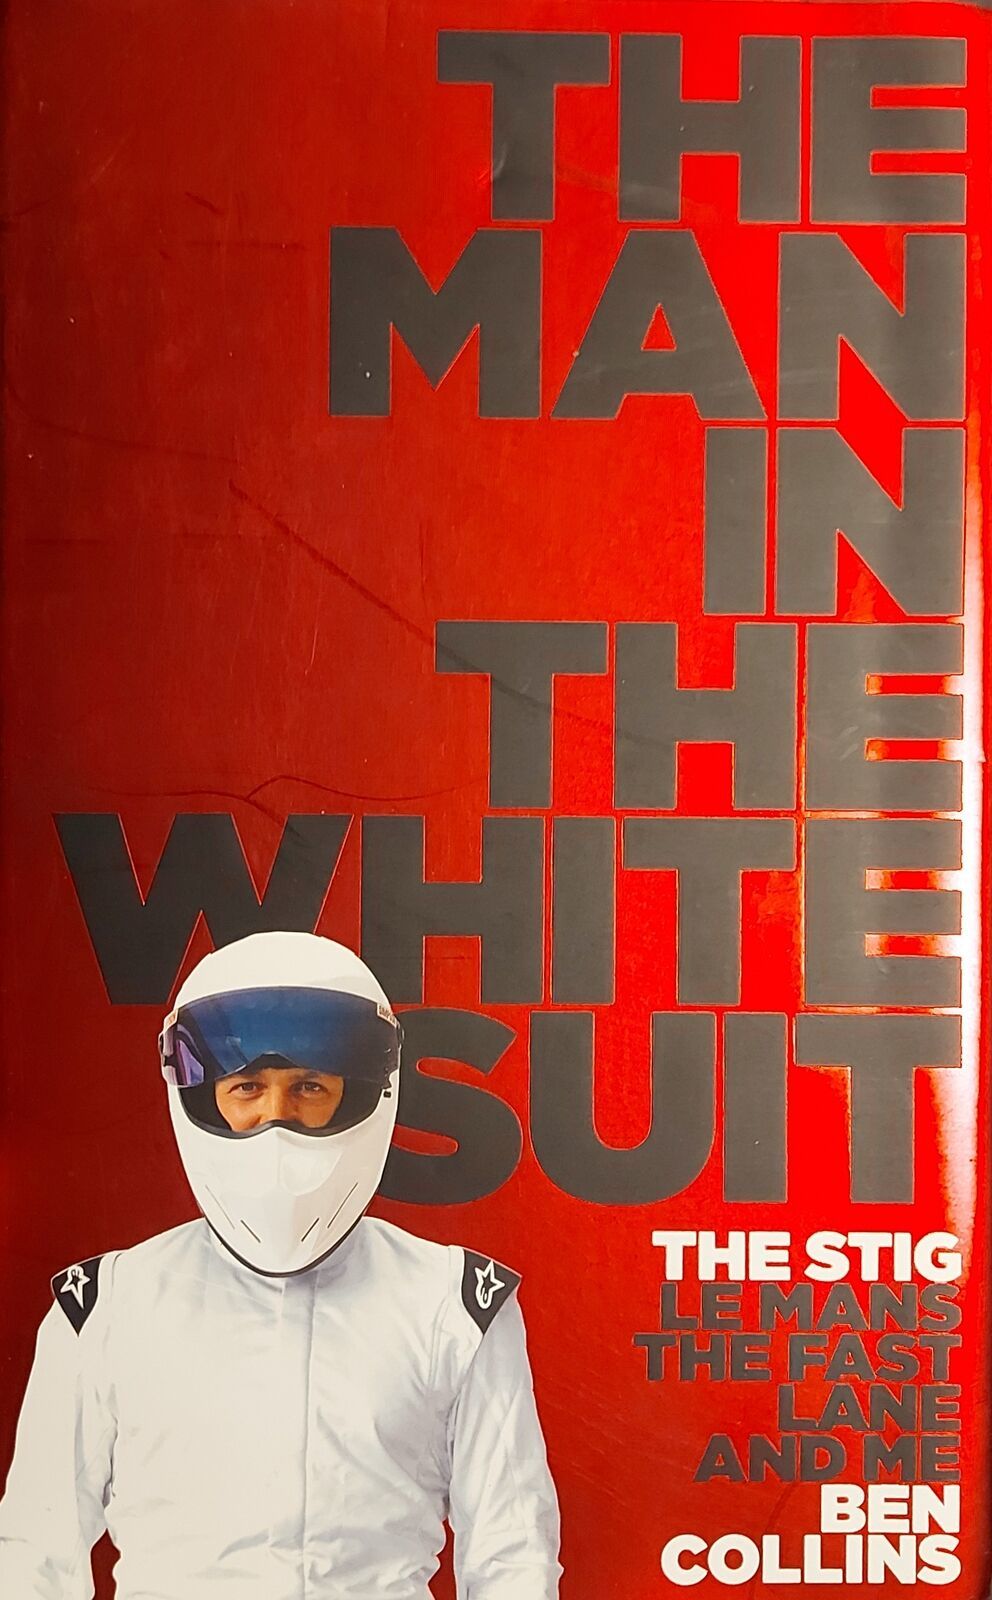 Primary image for The Man in the White Suit: The Stig, Le Mans, The Fast Lane and Me (2010)